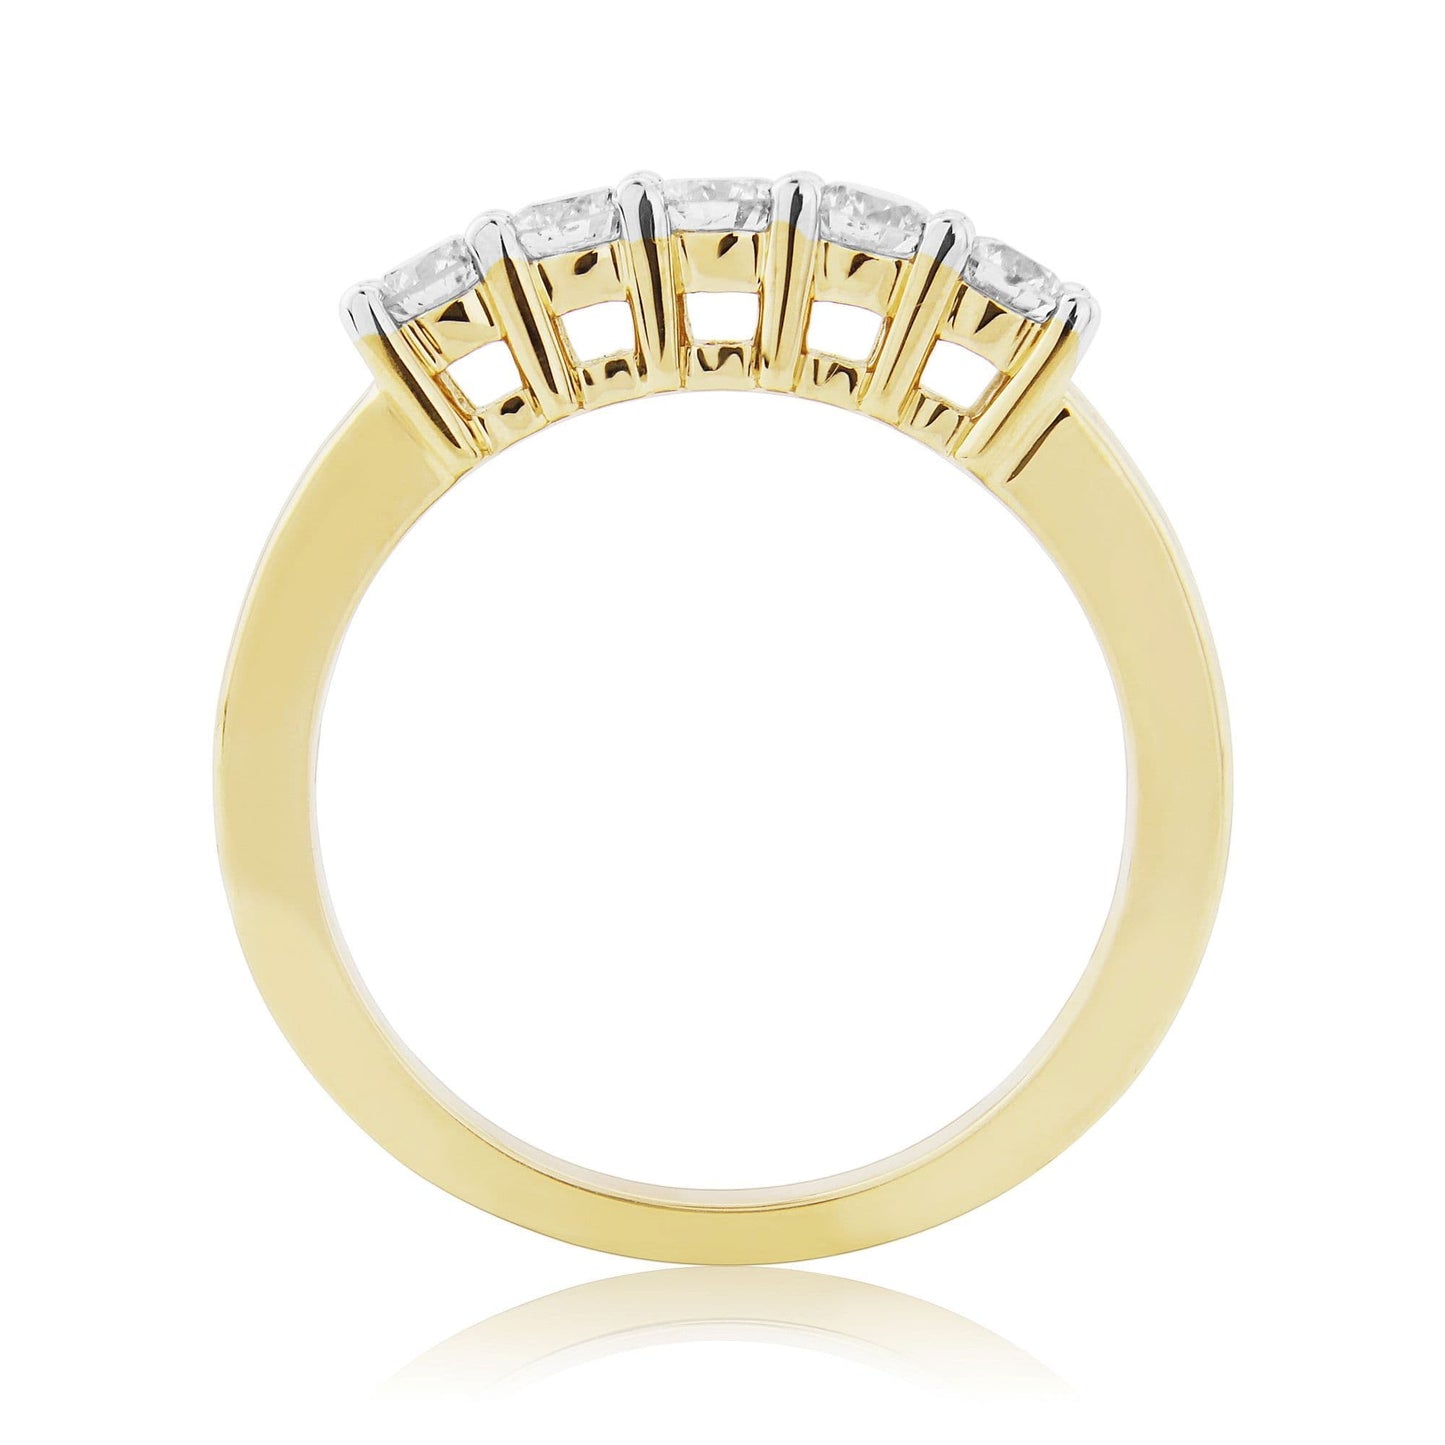 18 Carat yellow gold half carat diamond eternity ring with a claw setting